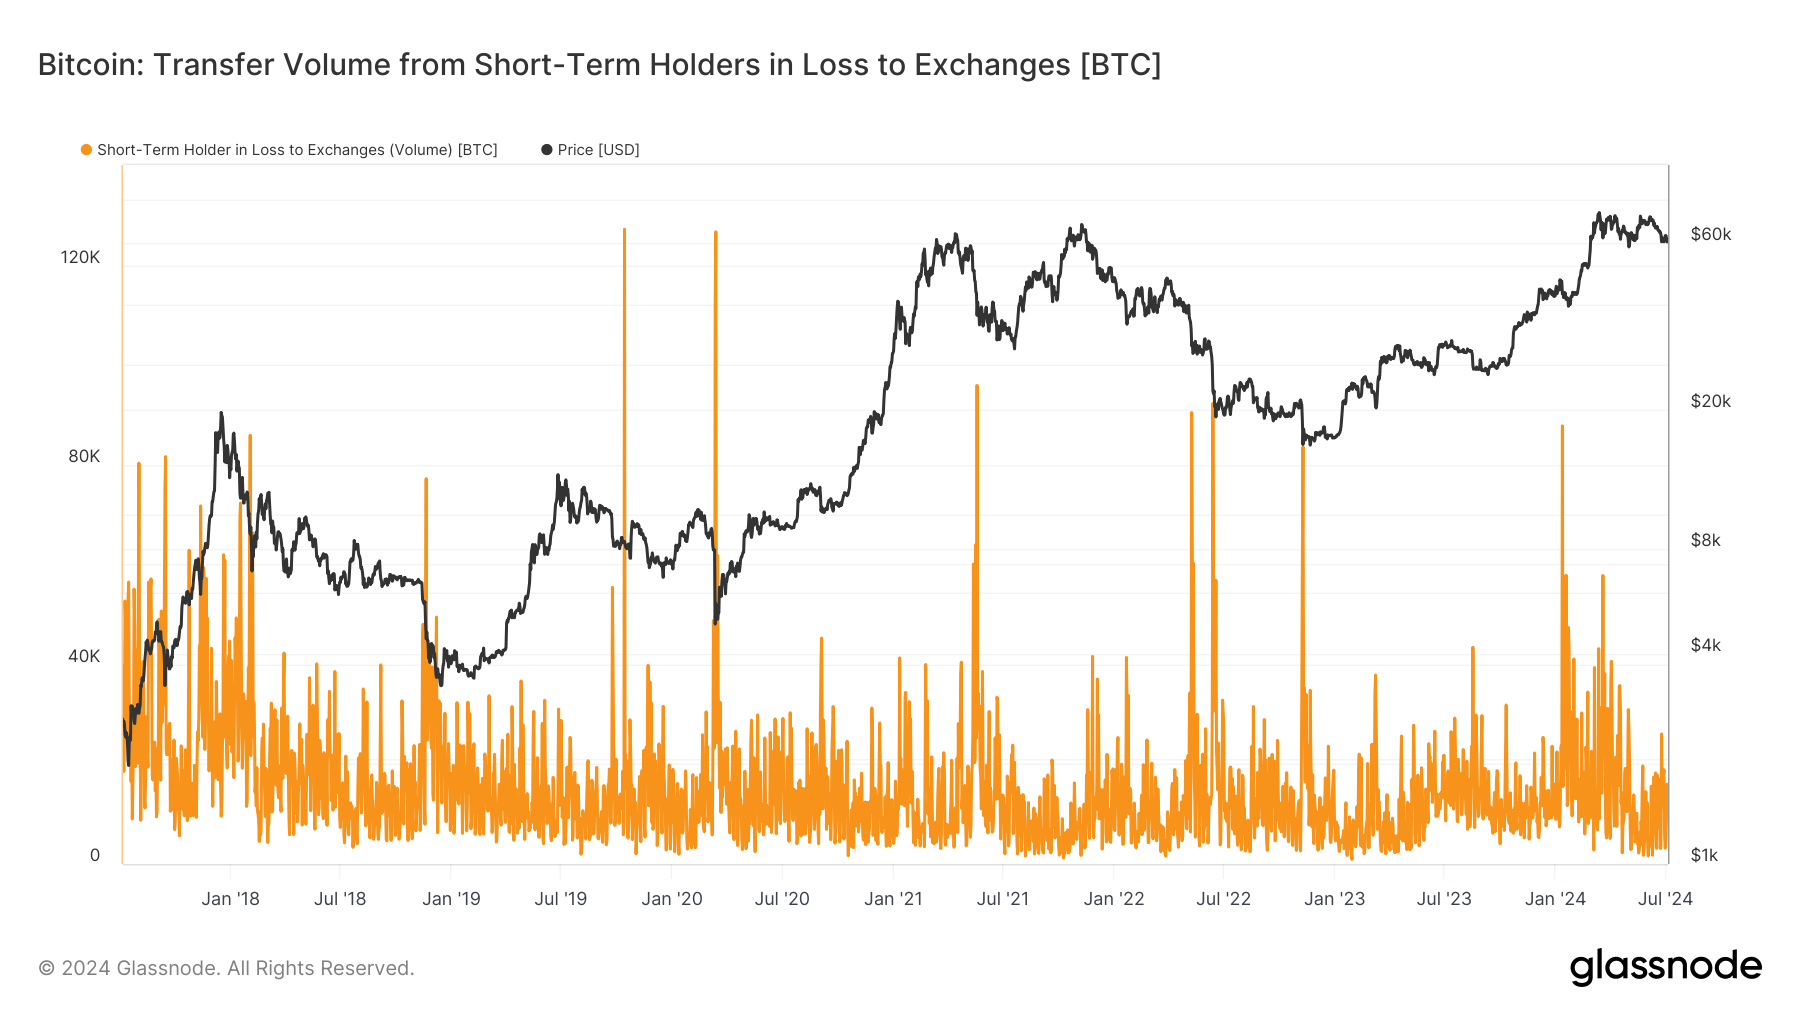 Transfer Volume from Short-Term Holders in Loss to Exchanges: (Source: Glassnode)